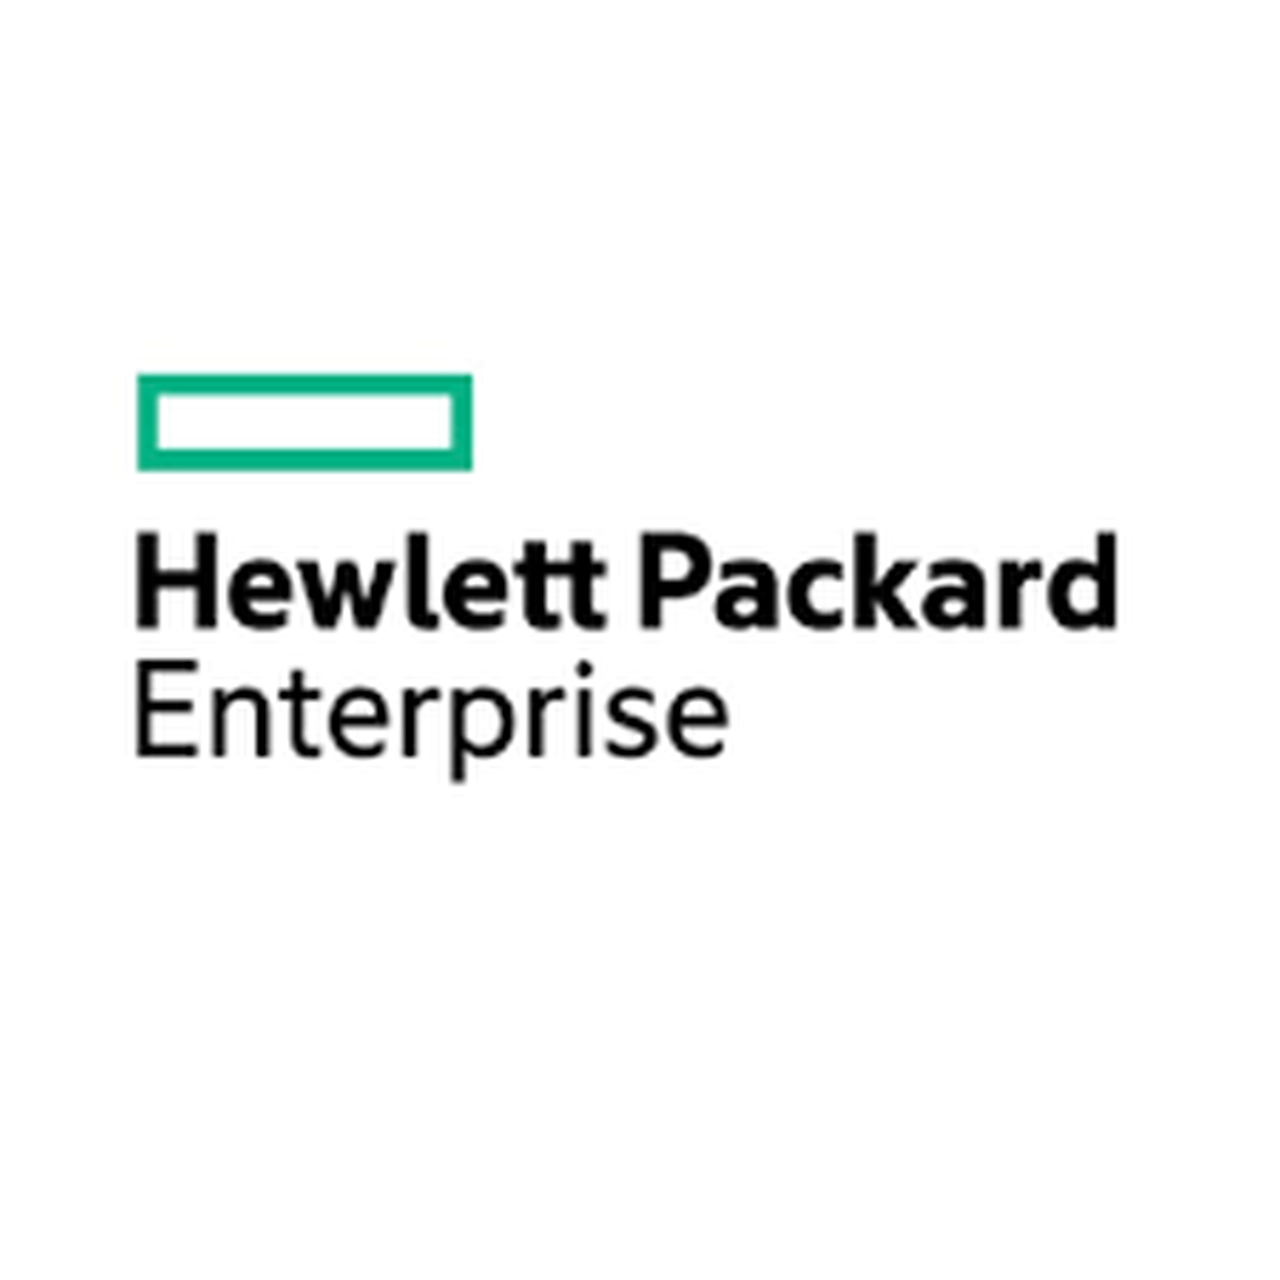 HPE 5940 48p 10GBT/6p 100G 2 F PS Chile - English localization